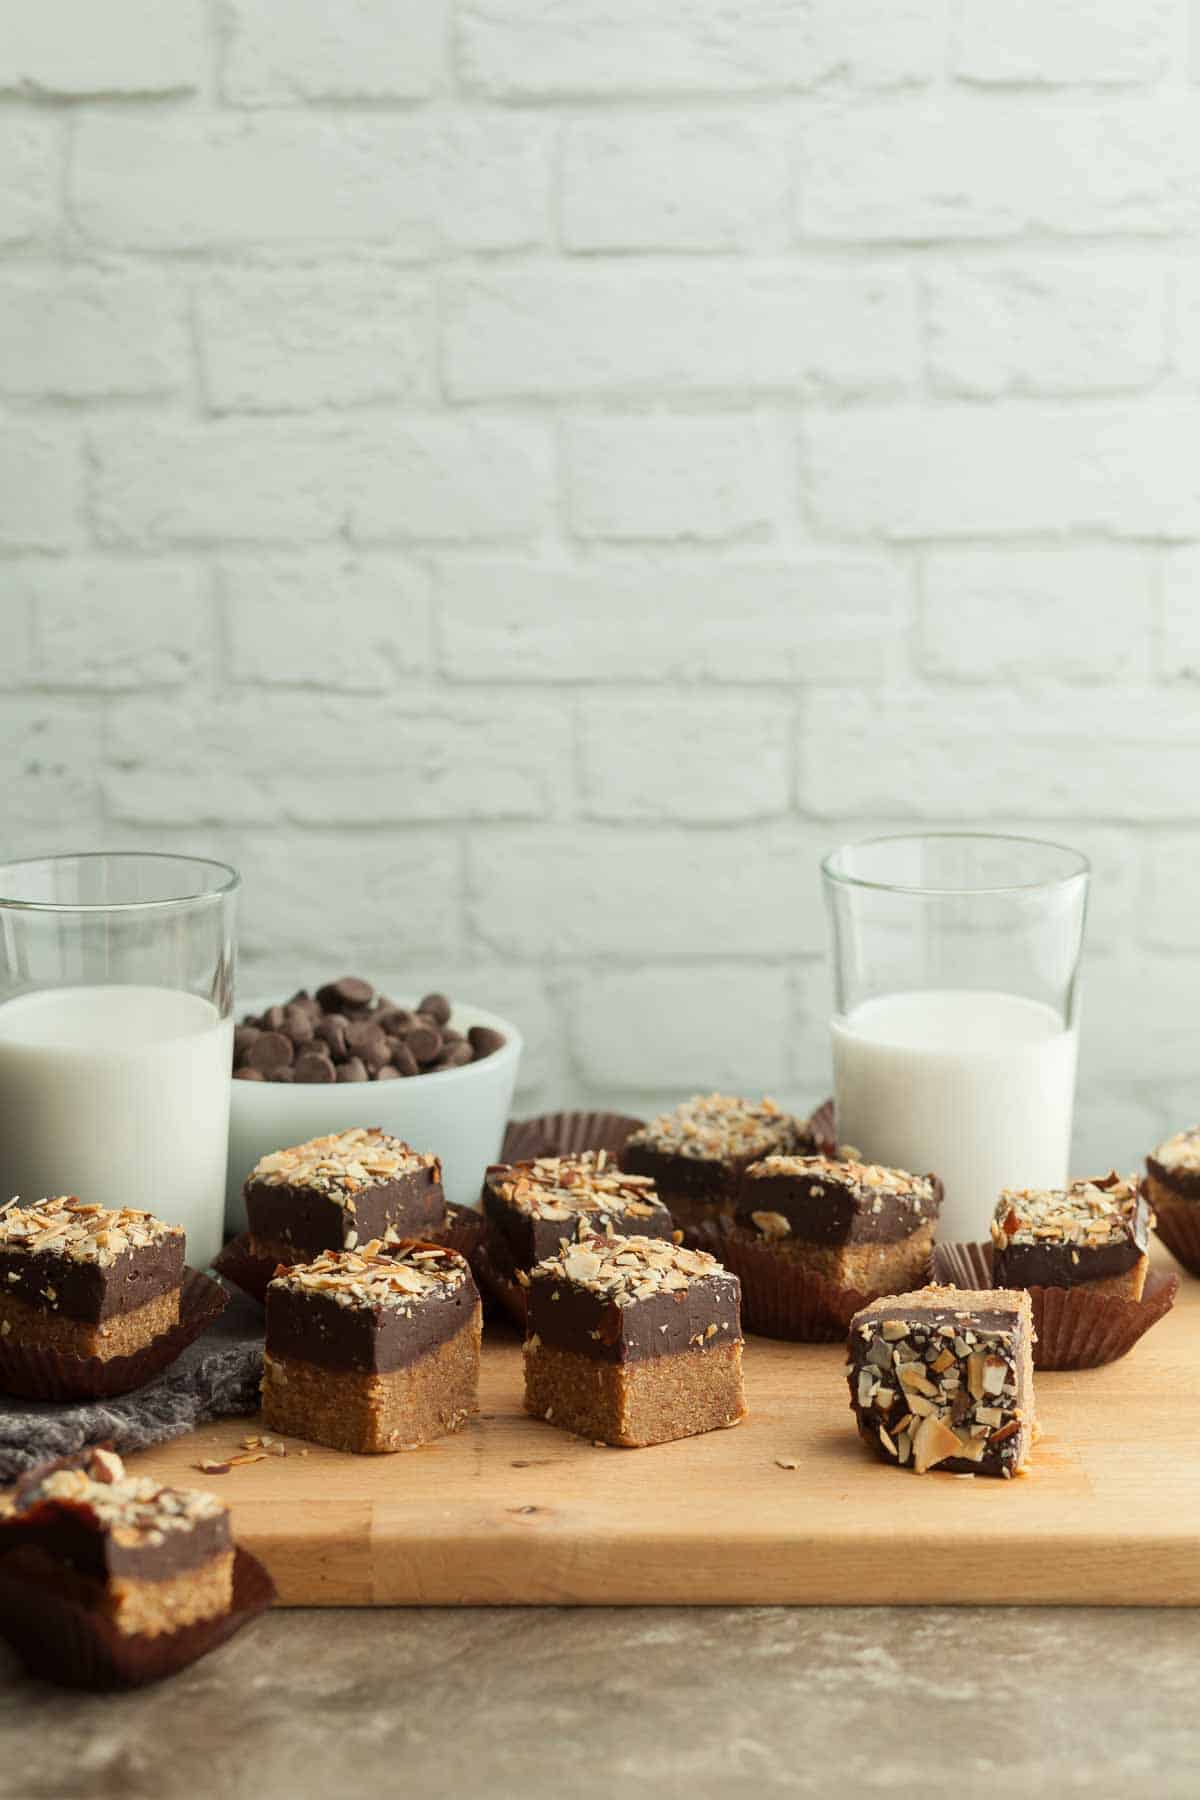 Almond Butter Bars on Serving Board with Milk Glasses